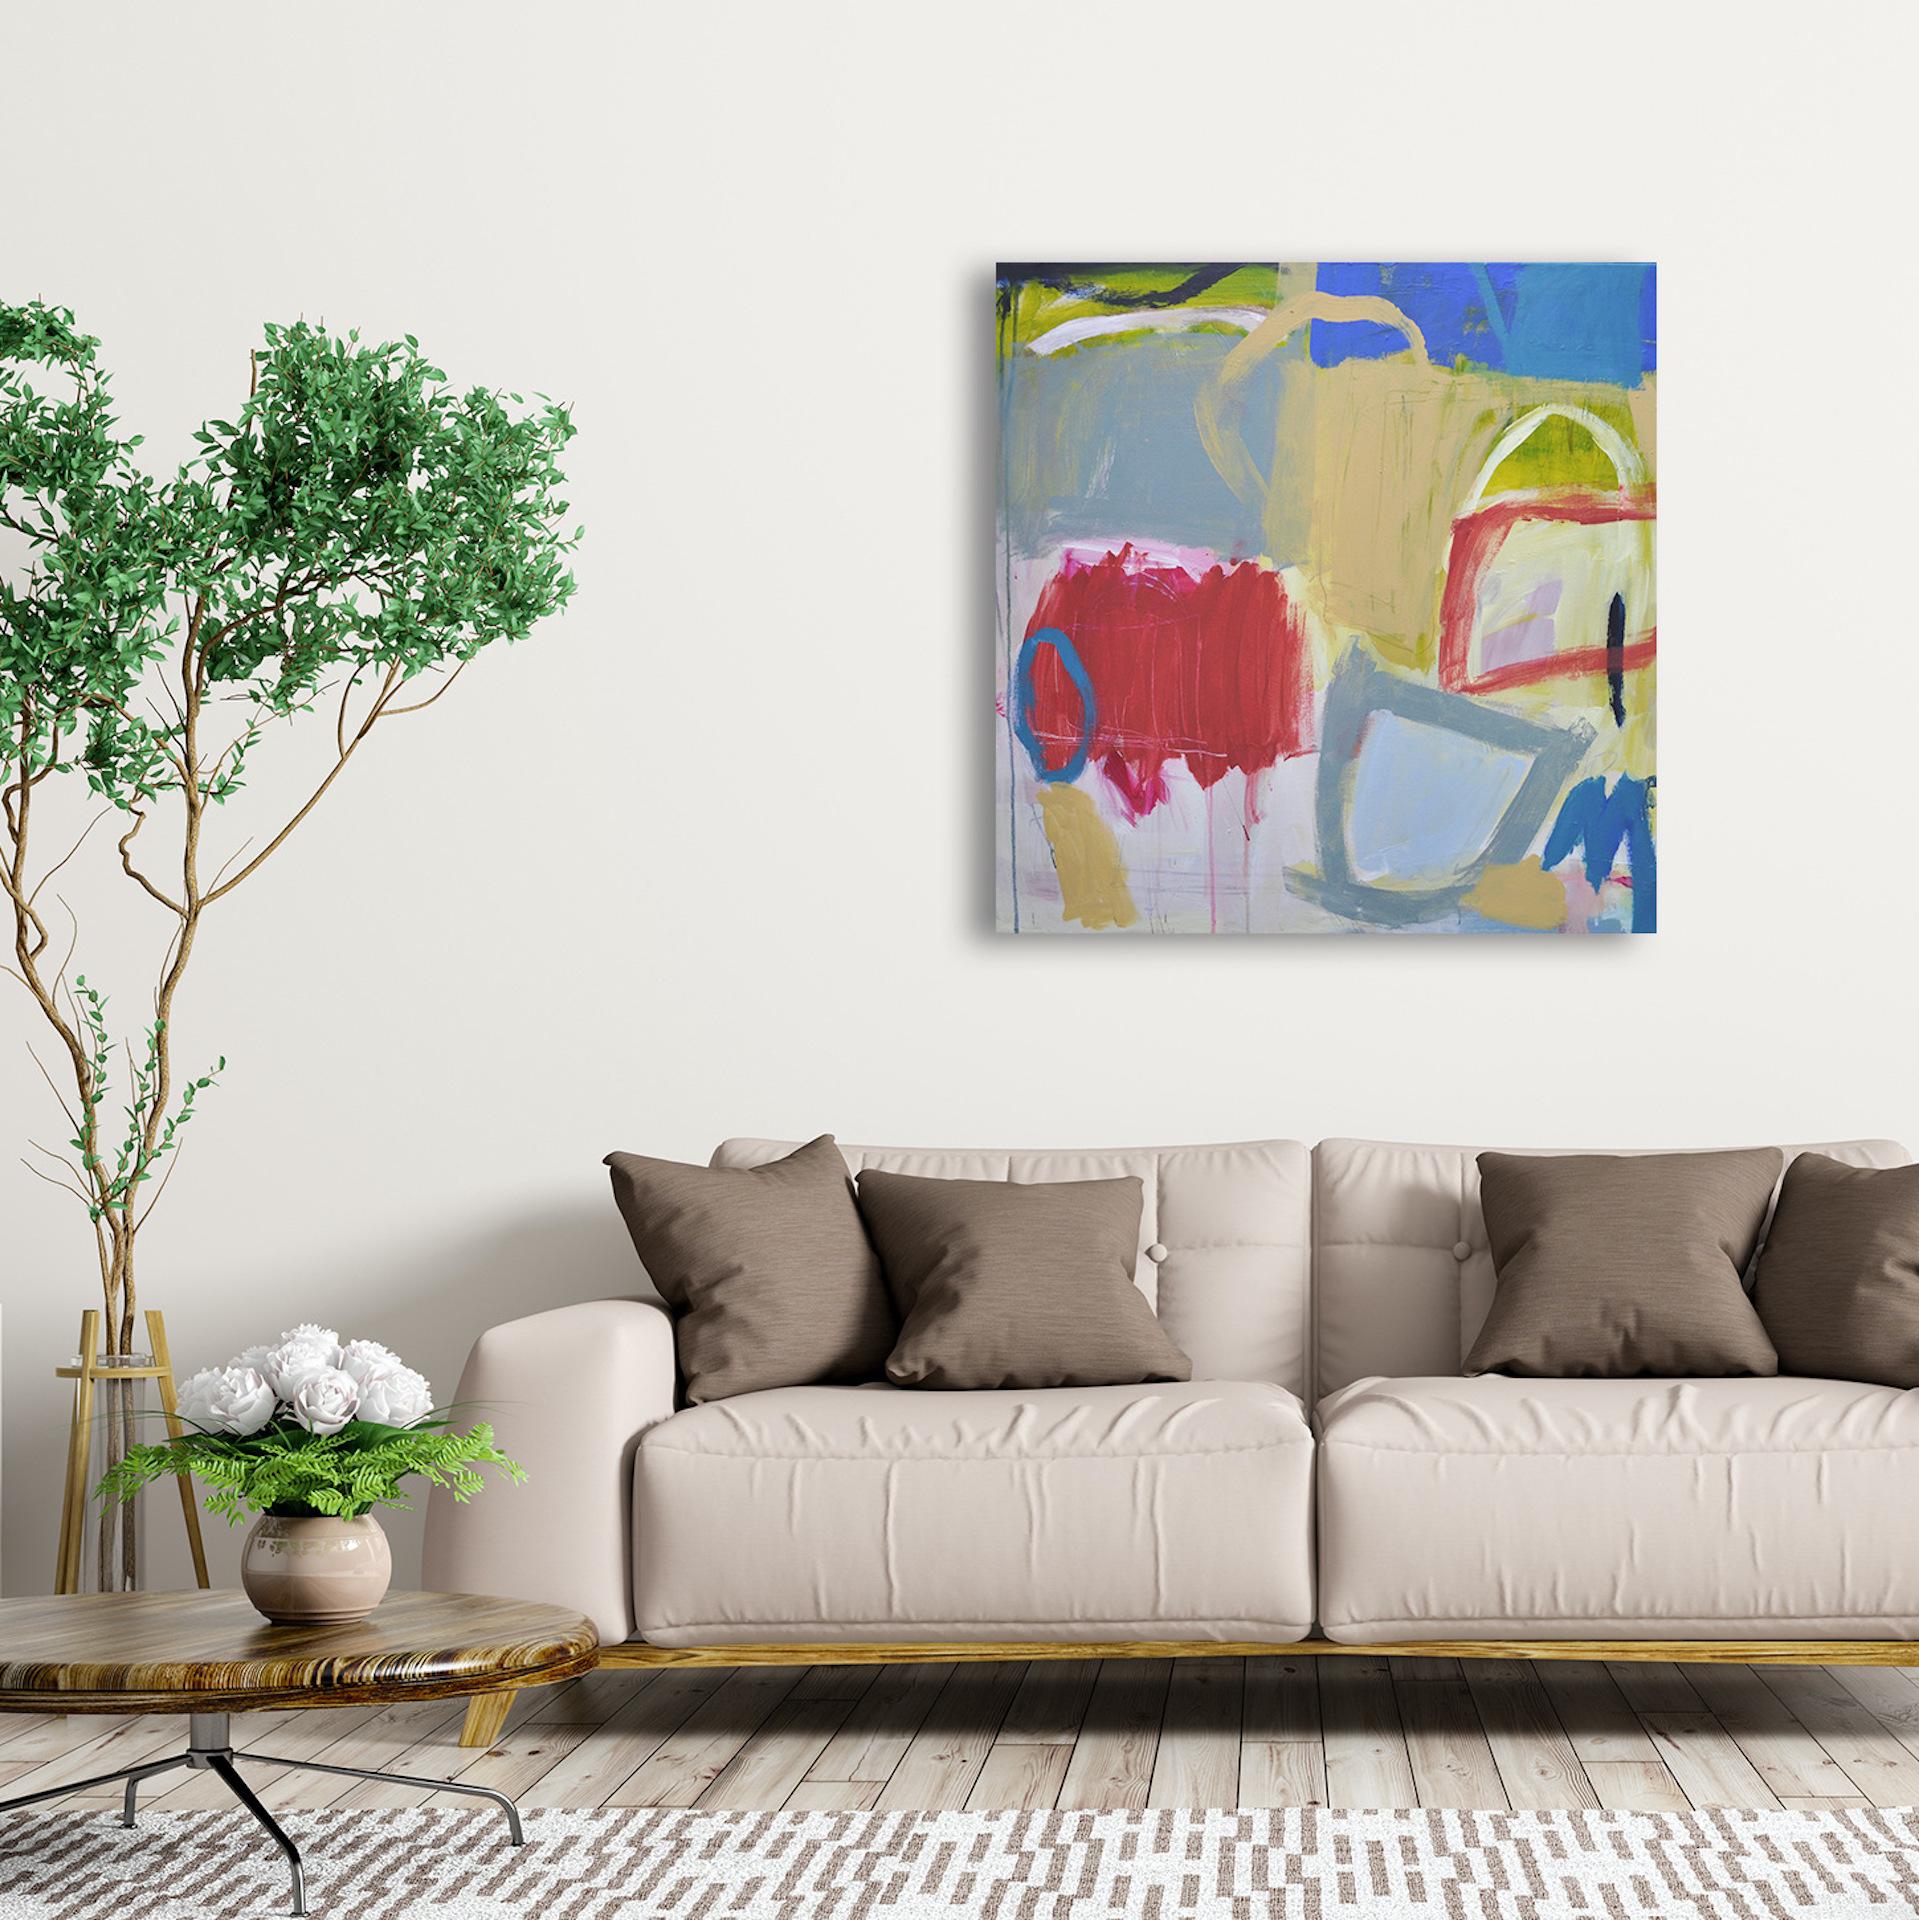 Diane Whalley
A Day To Remember
Original Semi-Abstract Painting
Paint on Canvas
Size: H 76cm x W 76cm
Sold Framed in a White Boxe Frame
Please note that insitu images are purely an indication of how a work may look.

A Day to Remember is an original